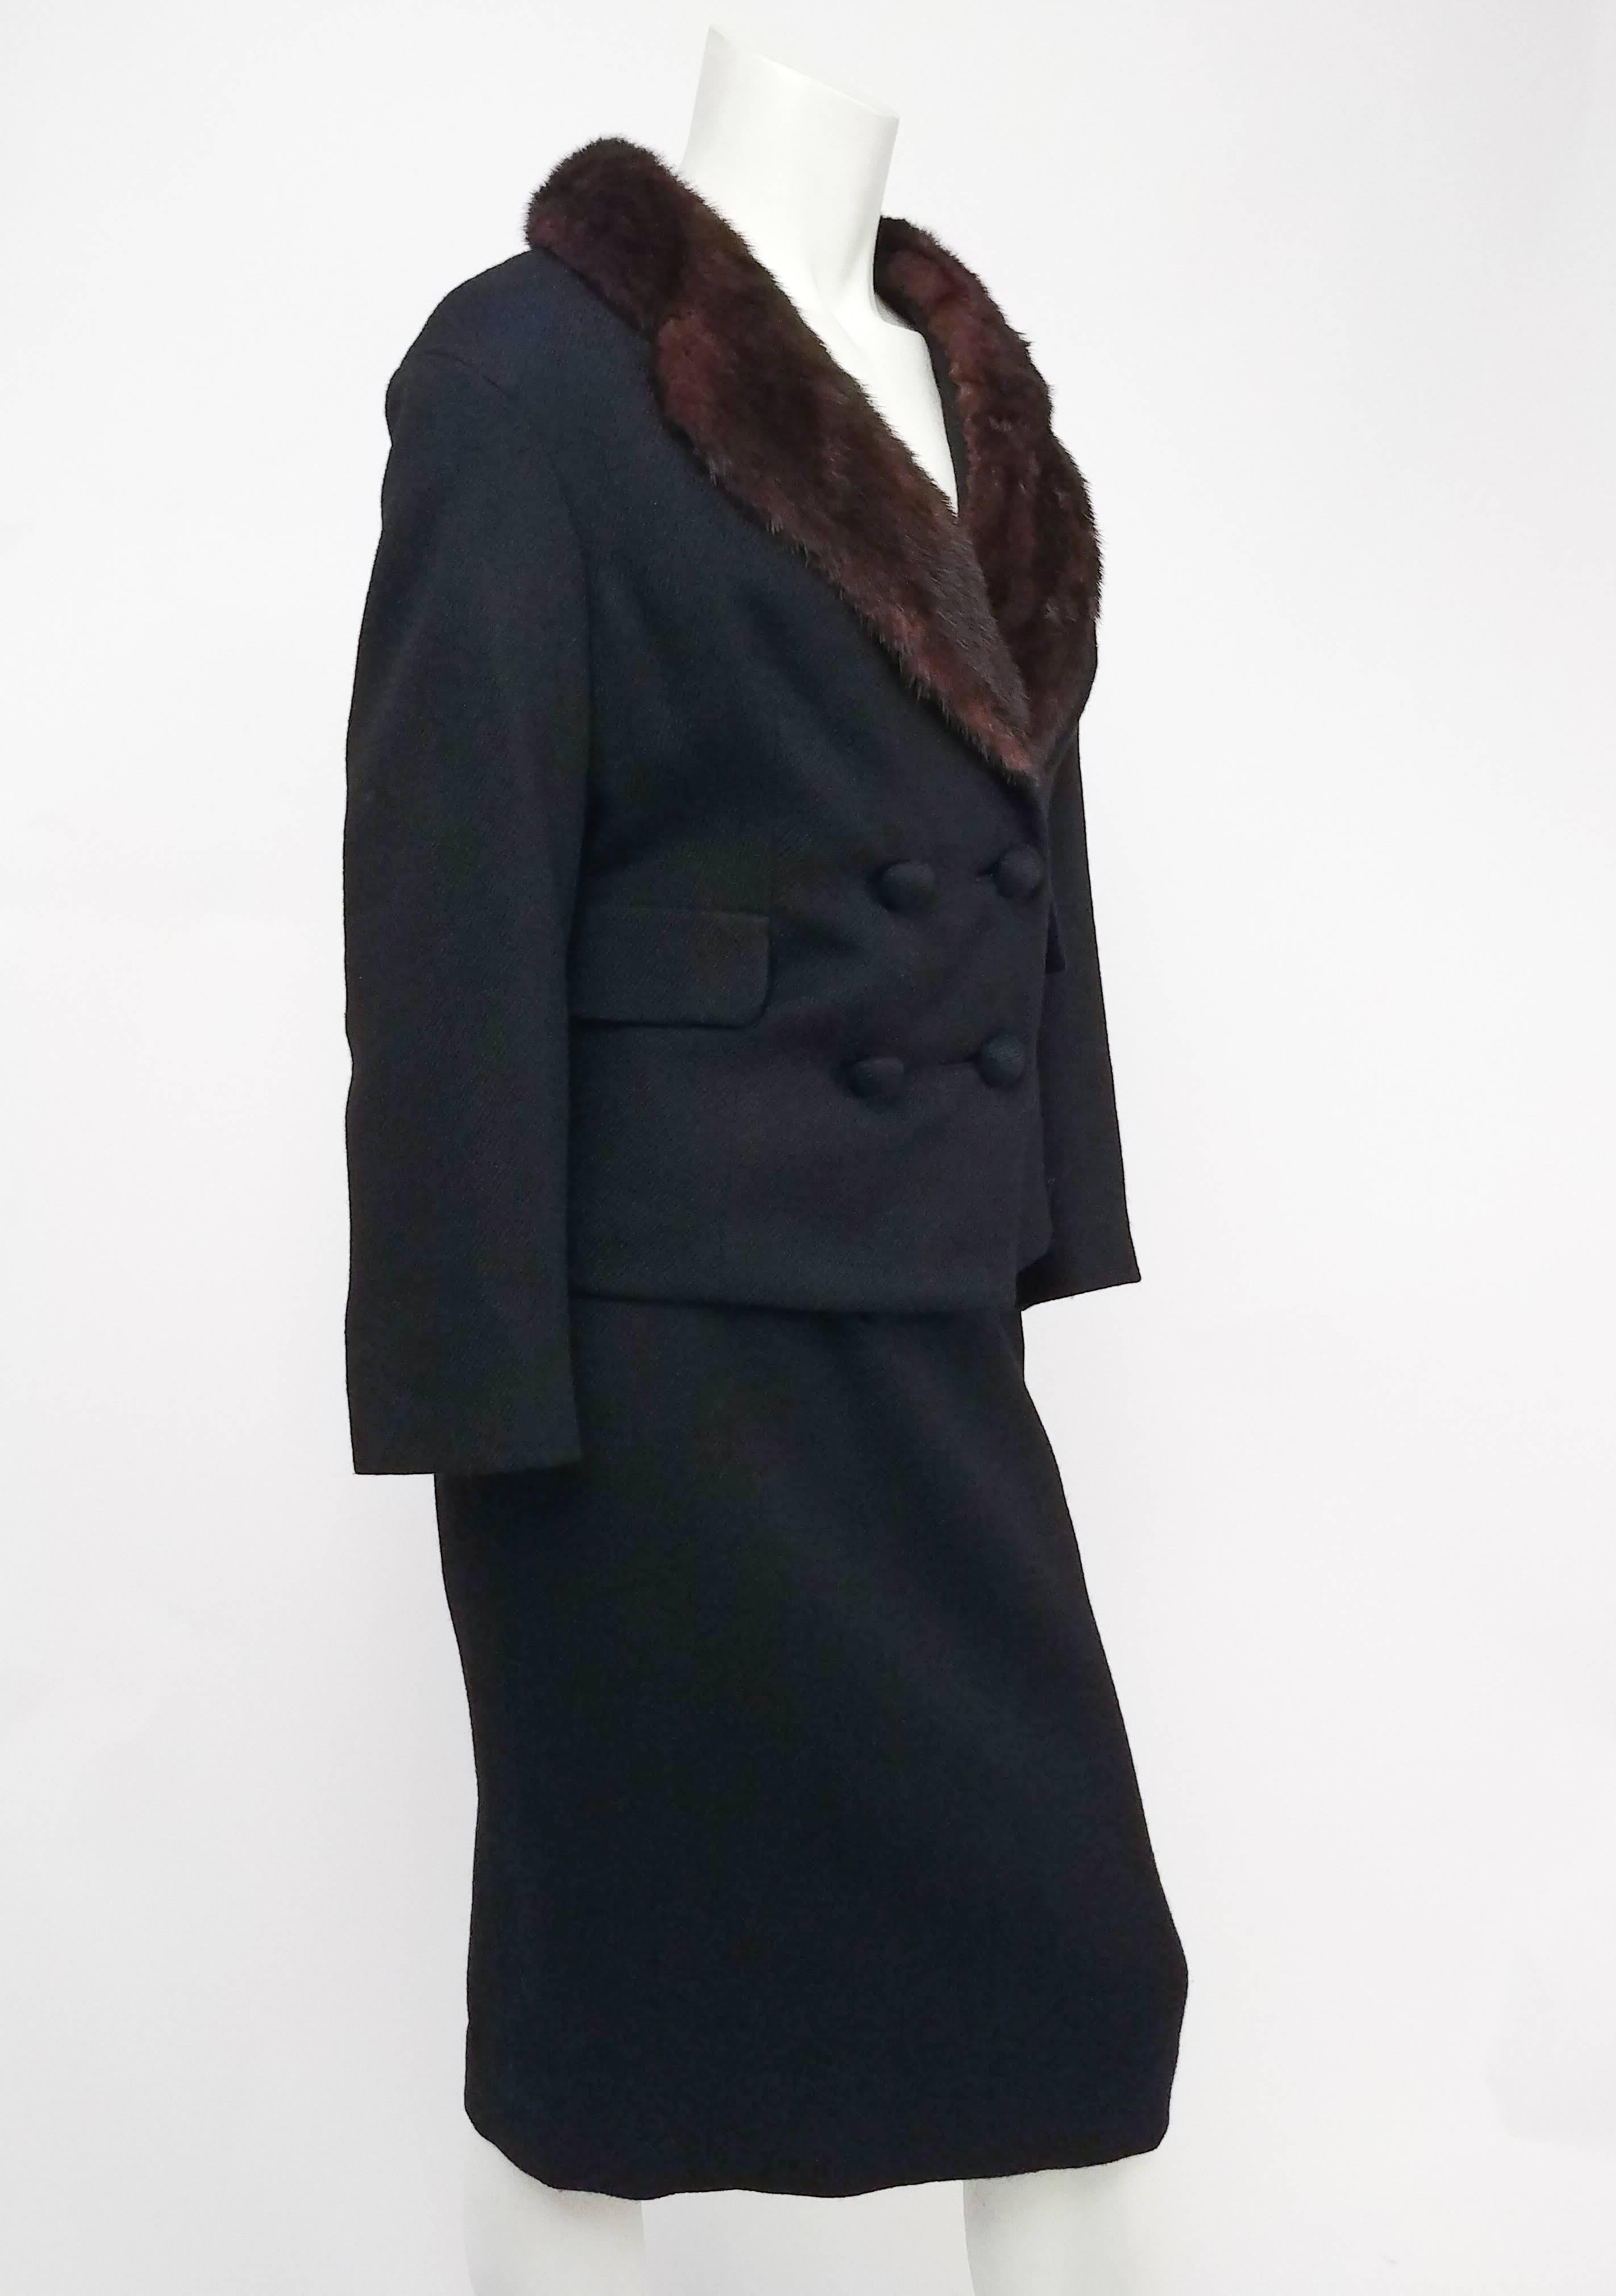 1960s Black Two Piece Suit Set w/ Mink Collar. Black wool twill suit set, boxy 1960s silhouette jacket, double breasted.